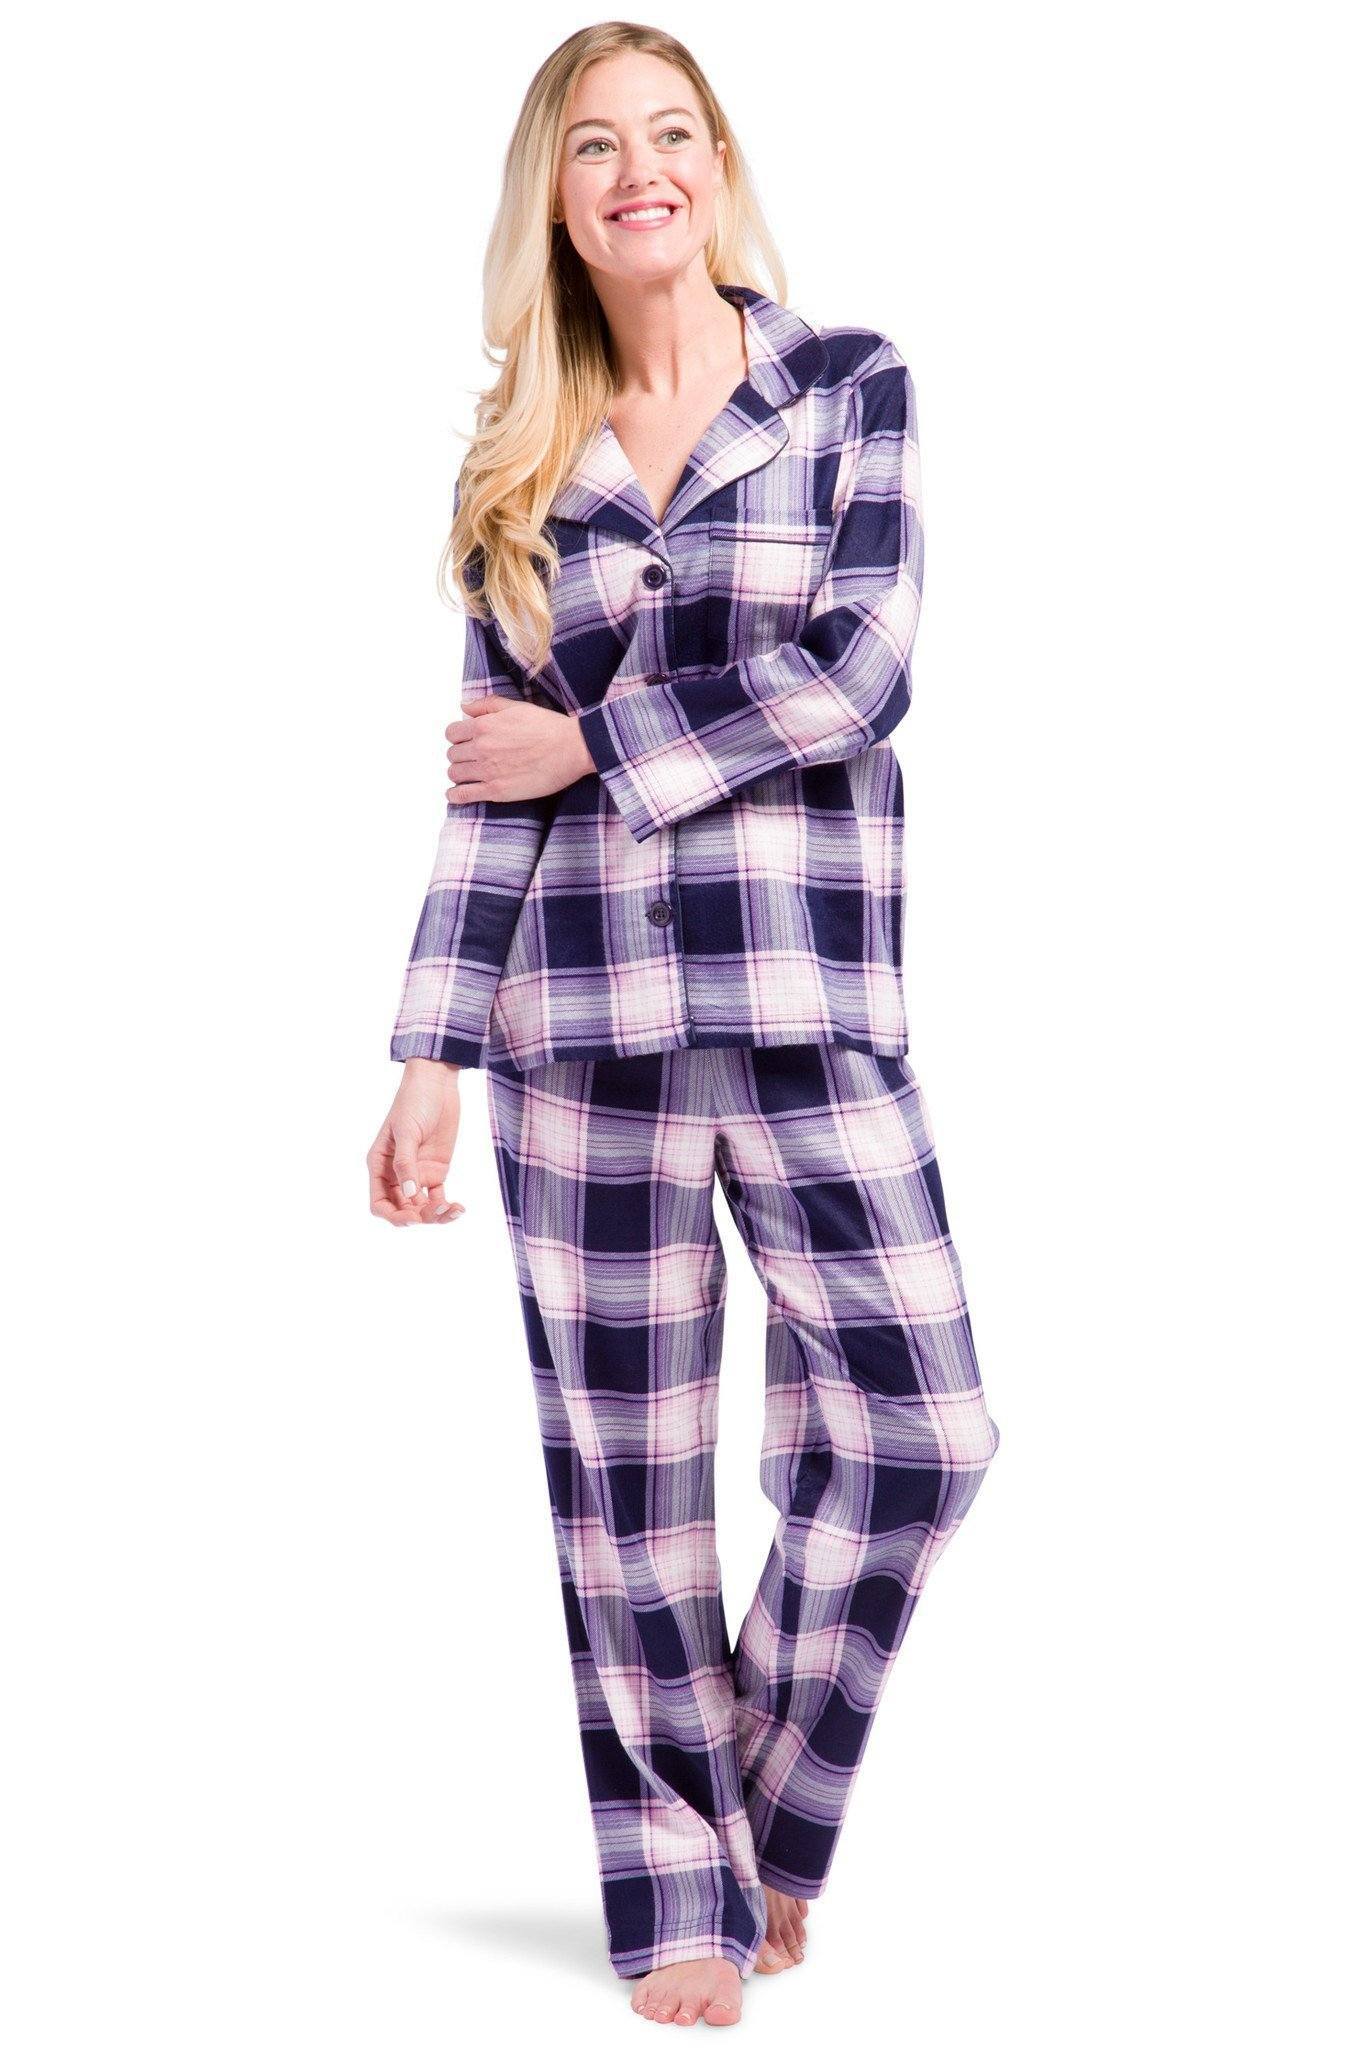 Women's Plus Size Pajama Set Knit Long Sleeve T-Shirt and Flannel